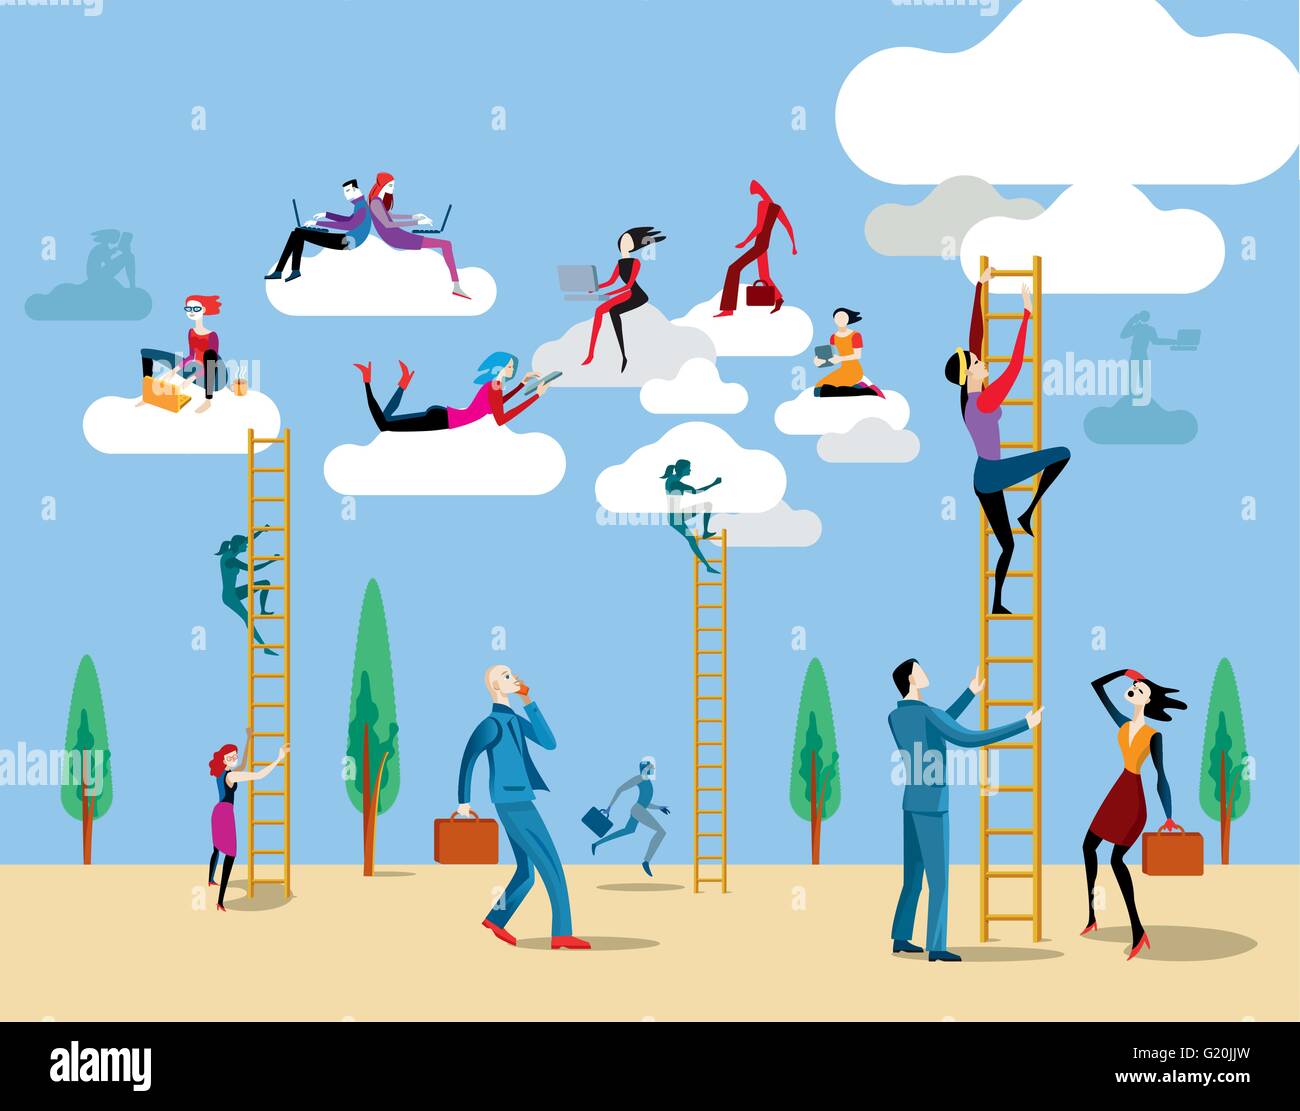 Men and women go up heaven by a ladders to access the cloud from which they work on-line and share information and knowledge. Stock Vector